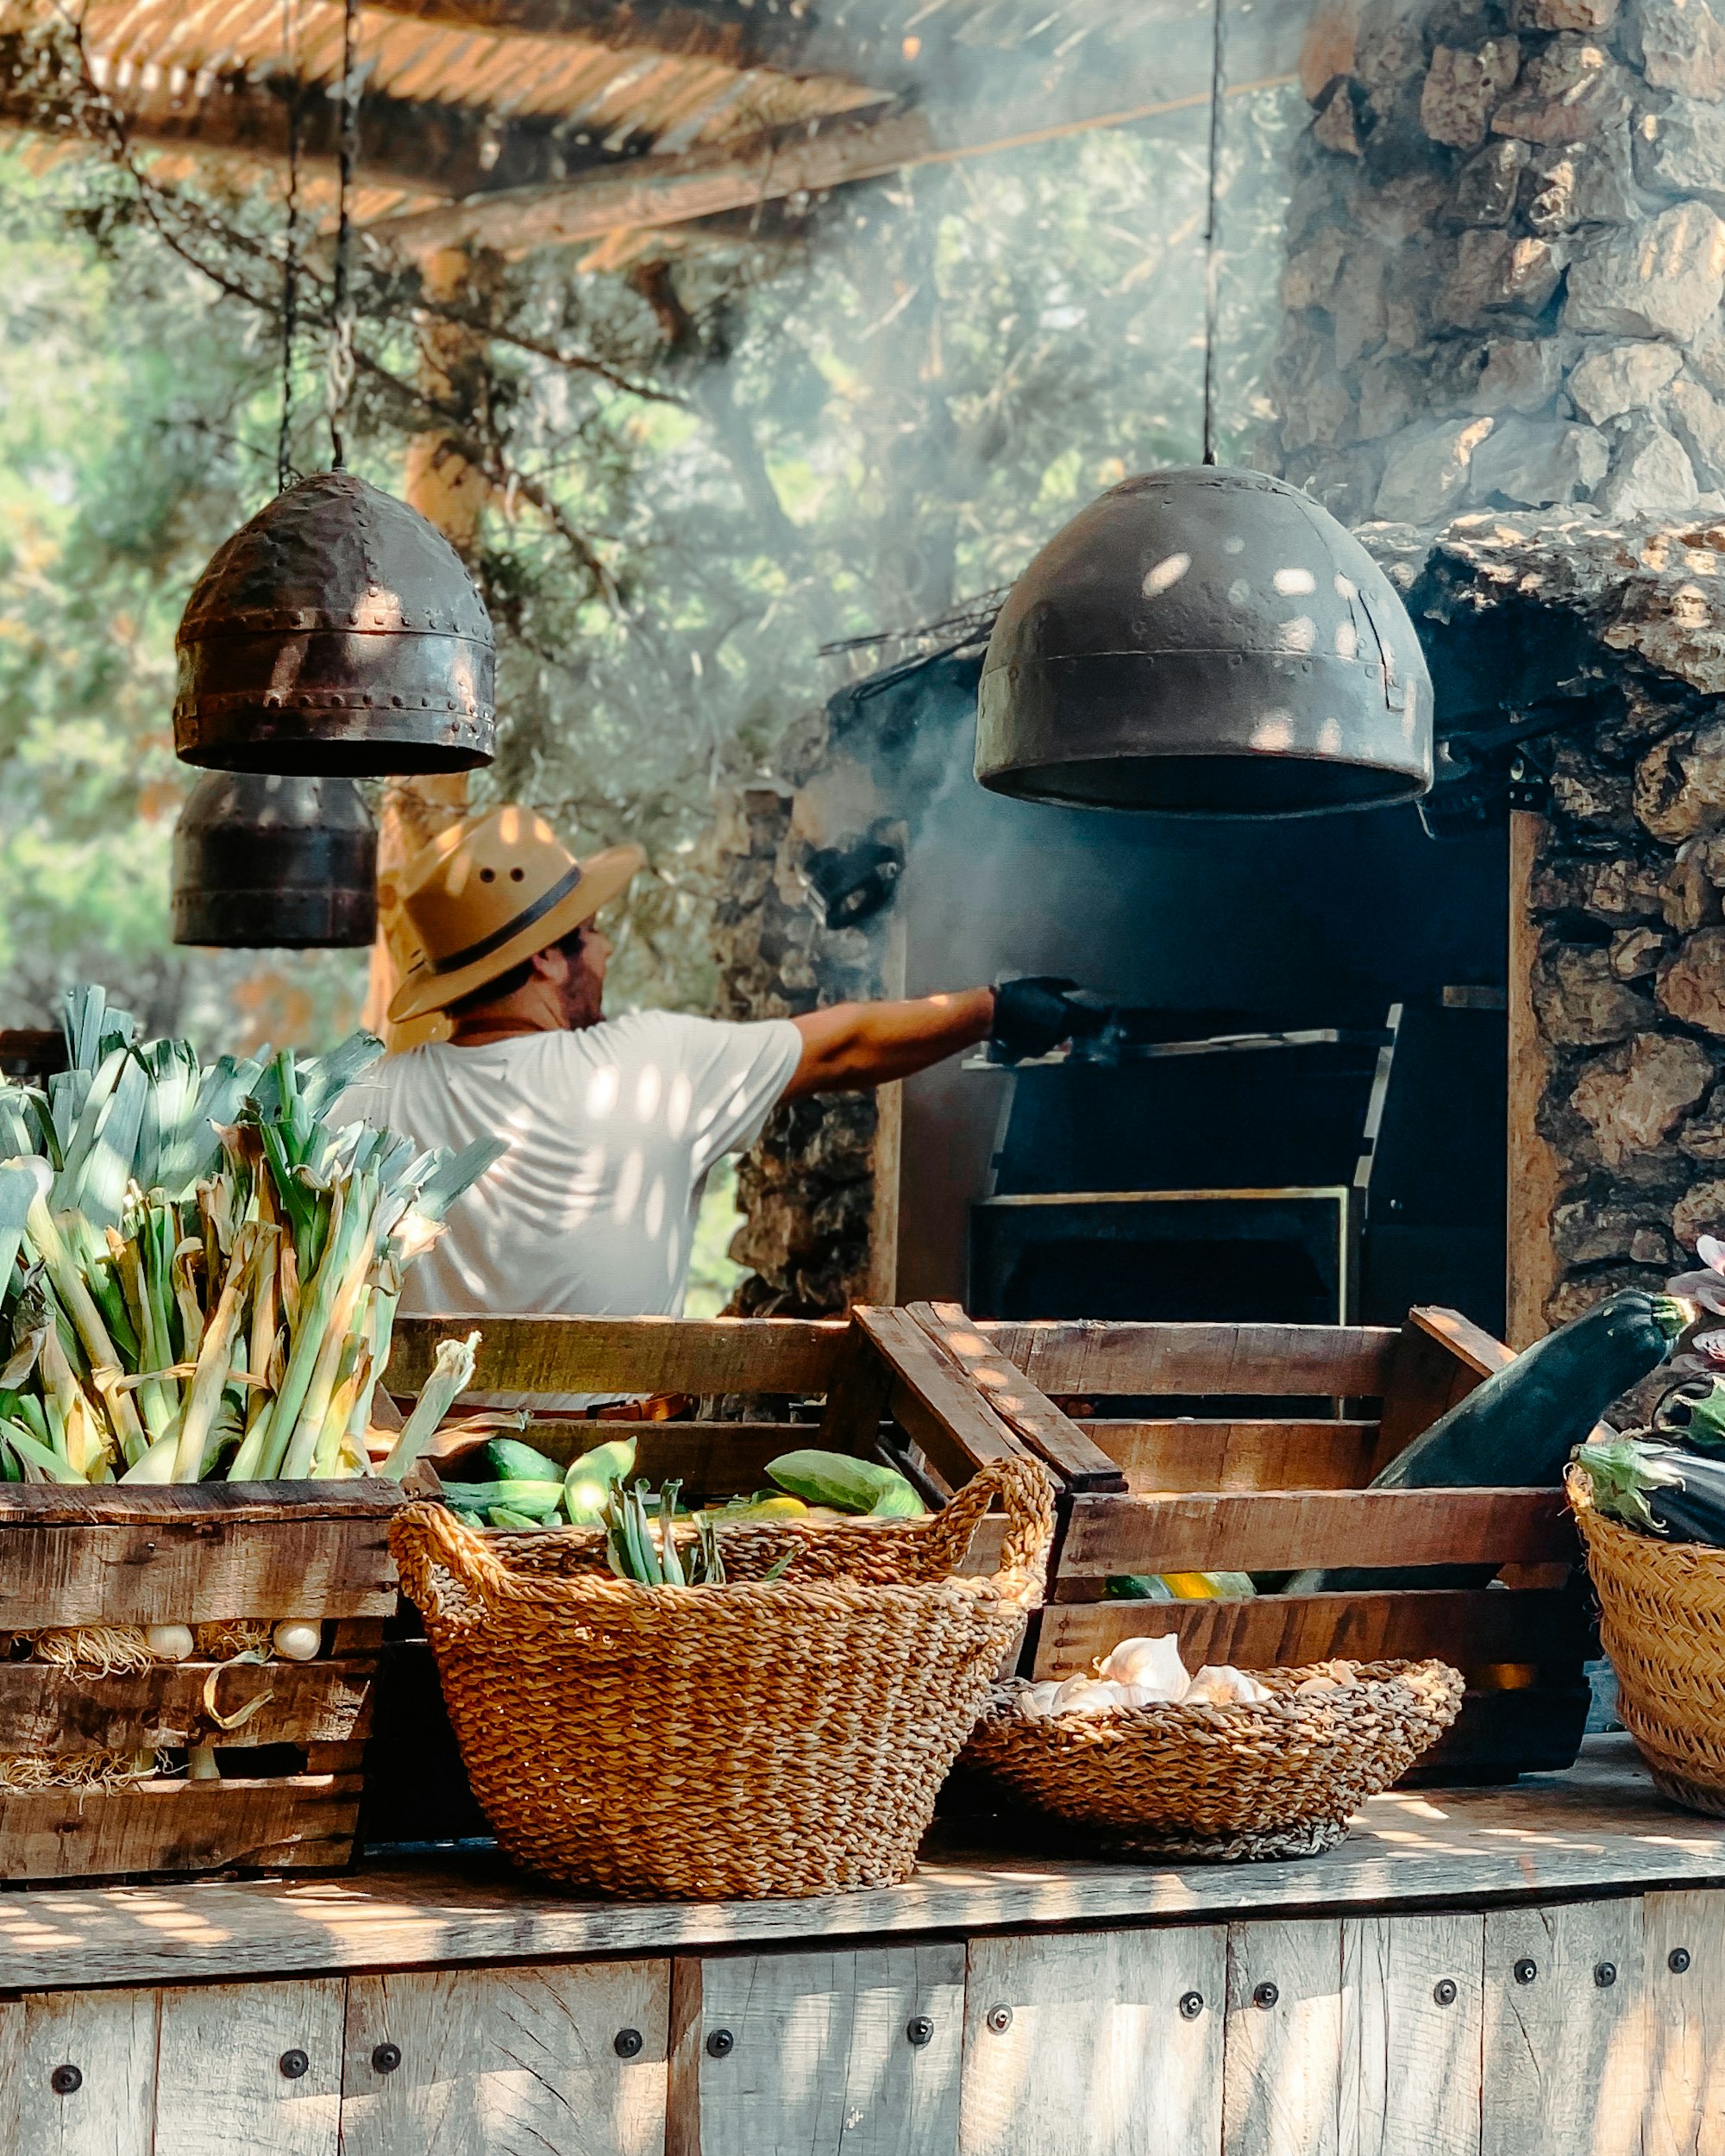 “The farmhouse is the golf course of the 21st century” – Claus Sendlinger. La Granja Ibiza is one of my favorite places on the island. An example of sustainable living, eating fresh, food growing in the garden & prepared with love. An organic farm with restaurant, live music and places to stay...